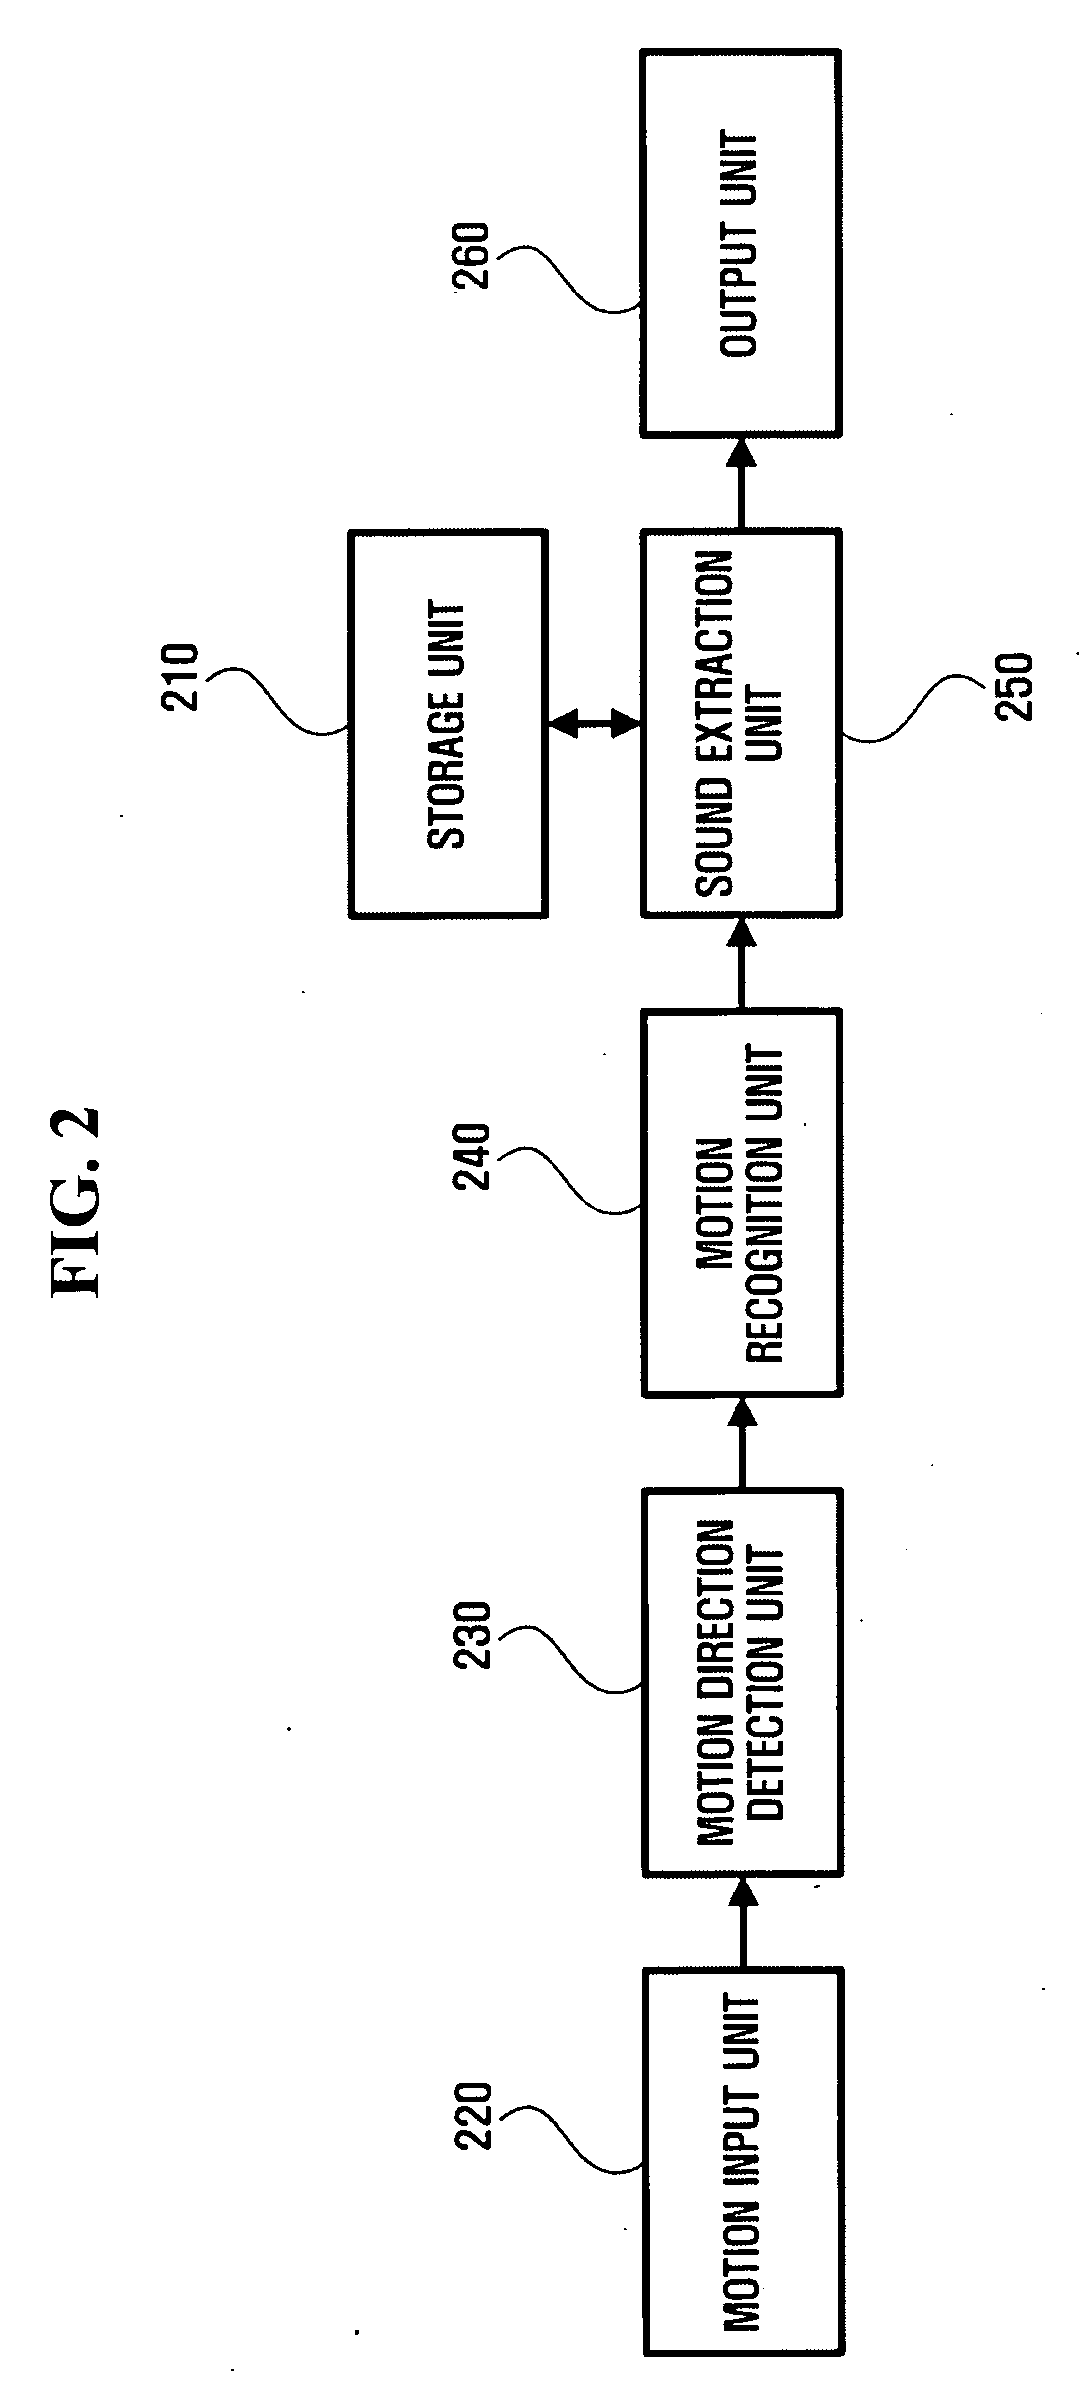 Apparatus, method, and medium for producing motion-generated sound